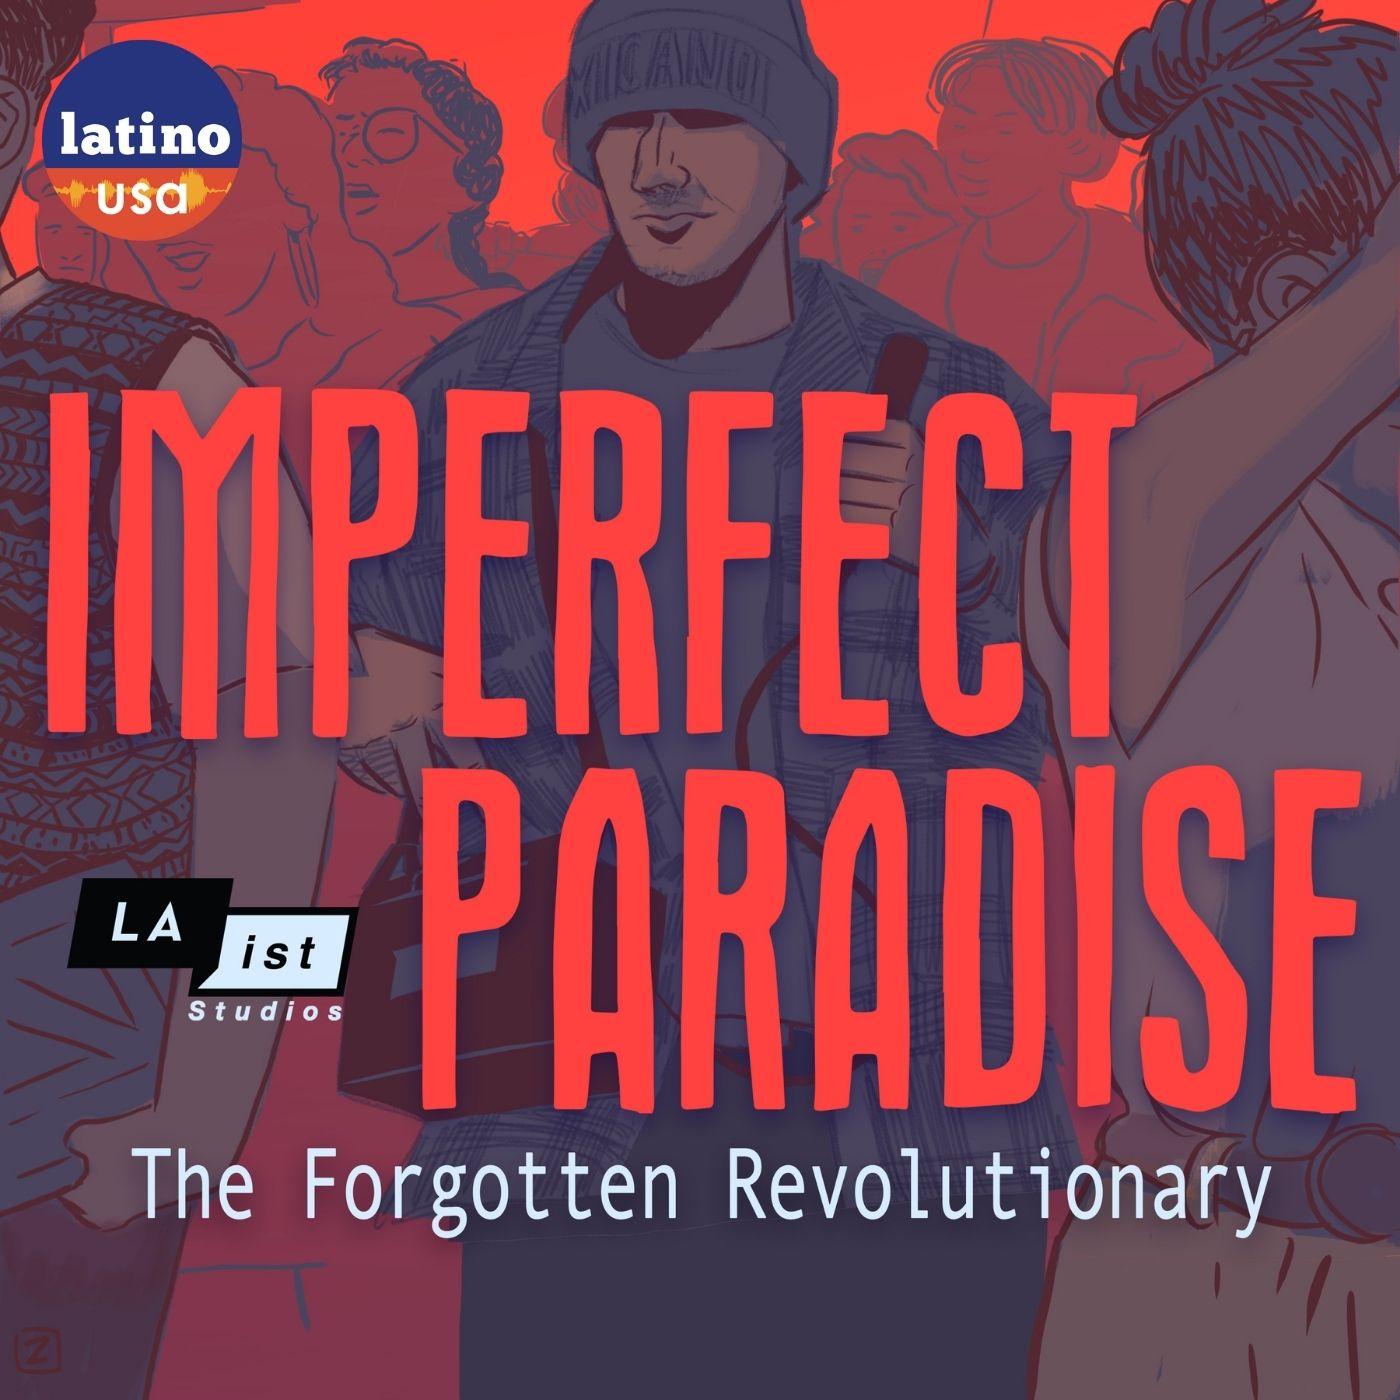 Thumbnail for "Imperfect Paradise: The Forgotten Revolutionary".